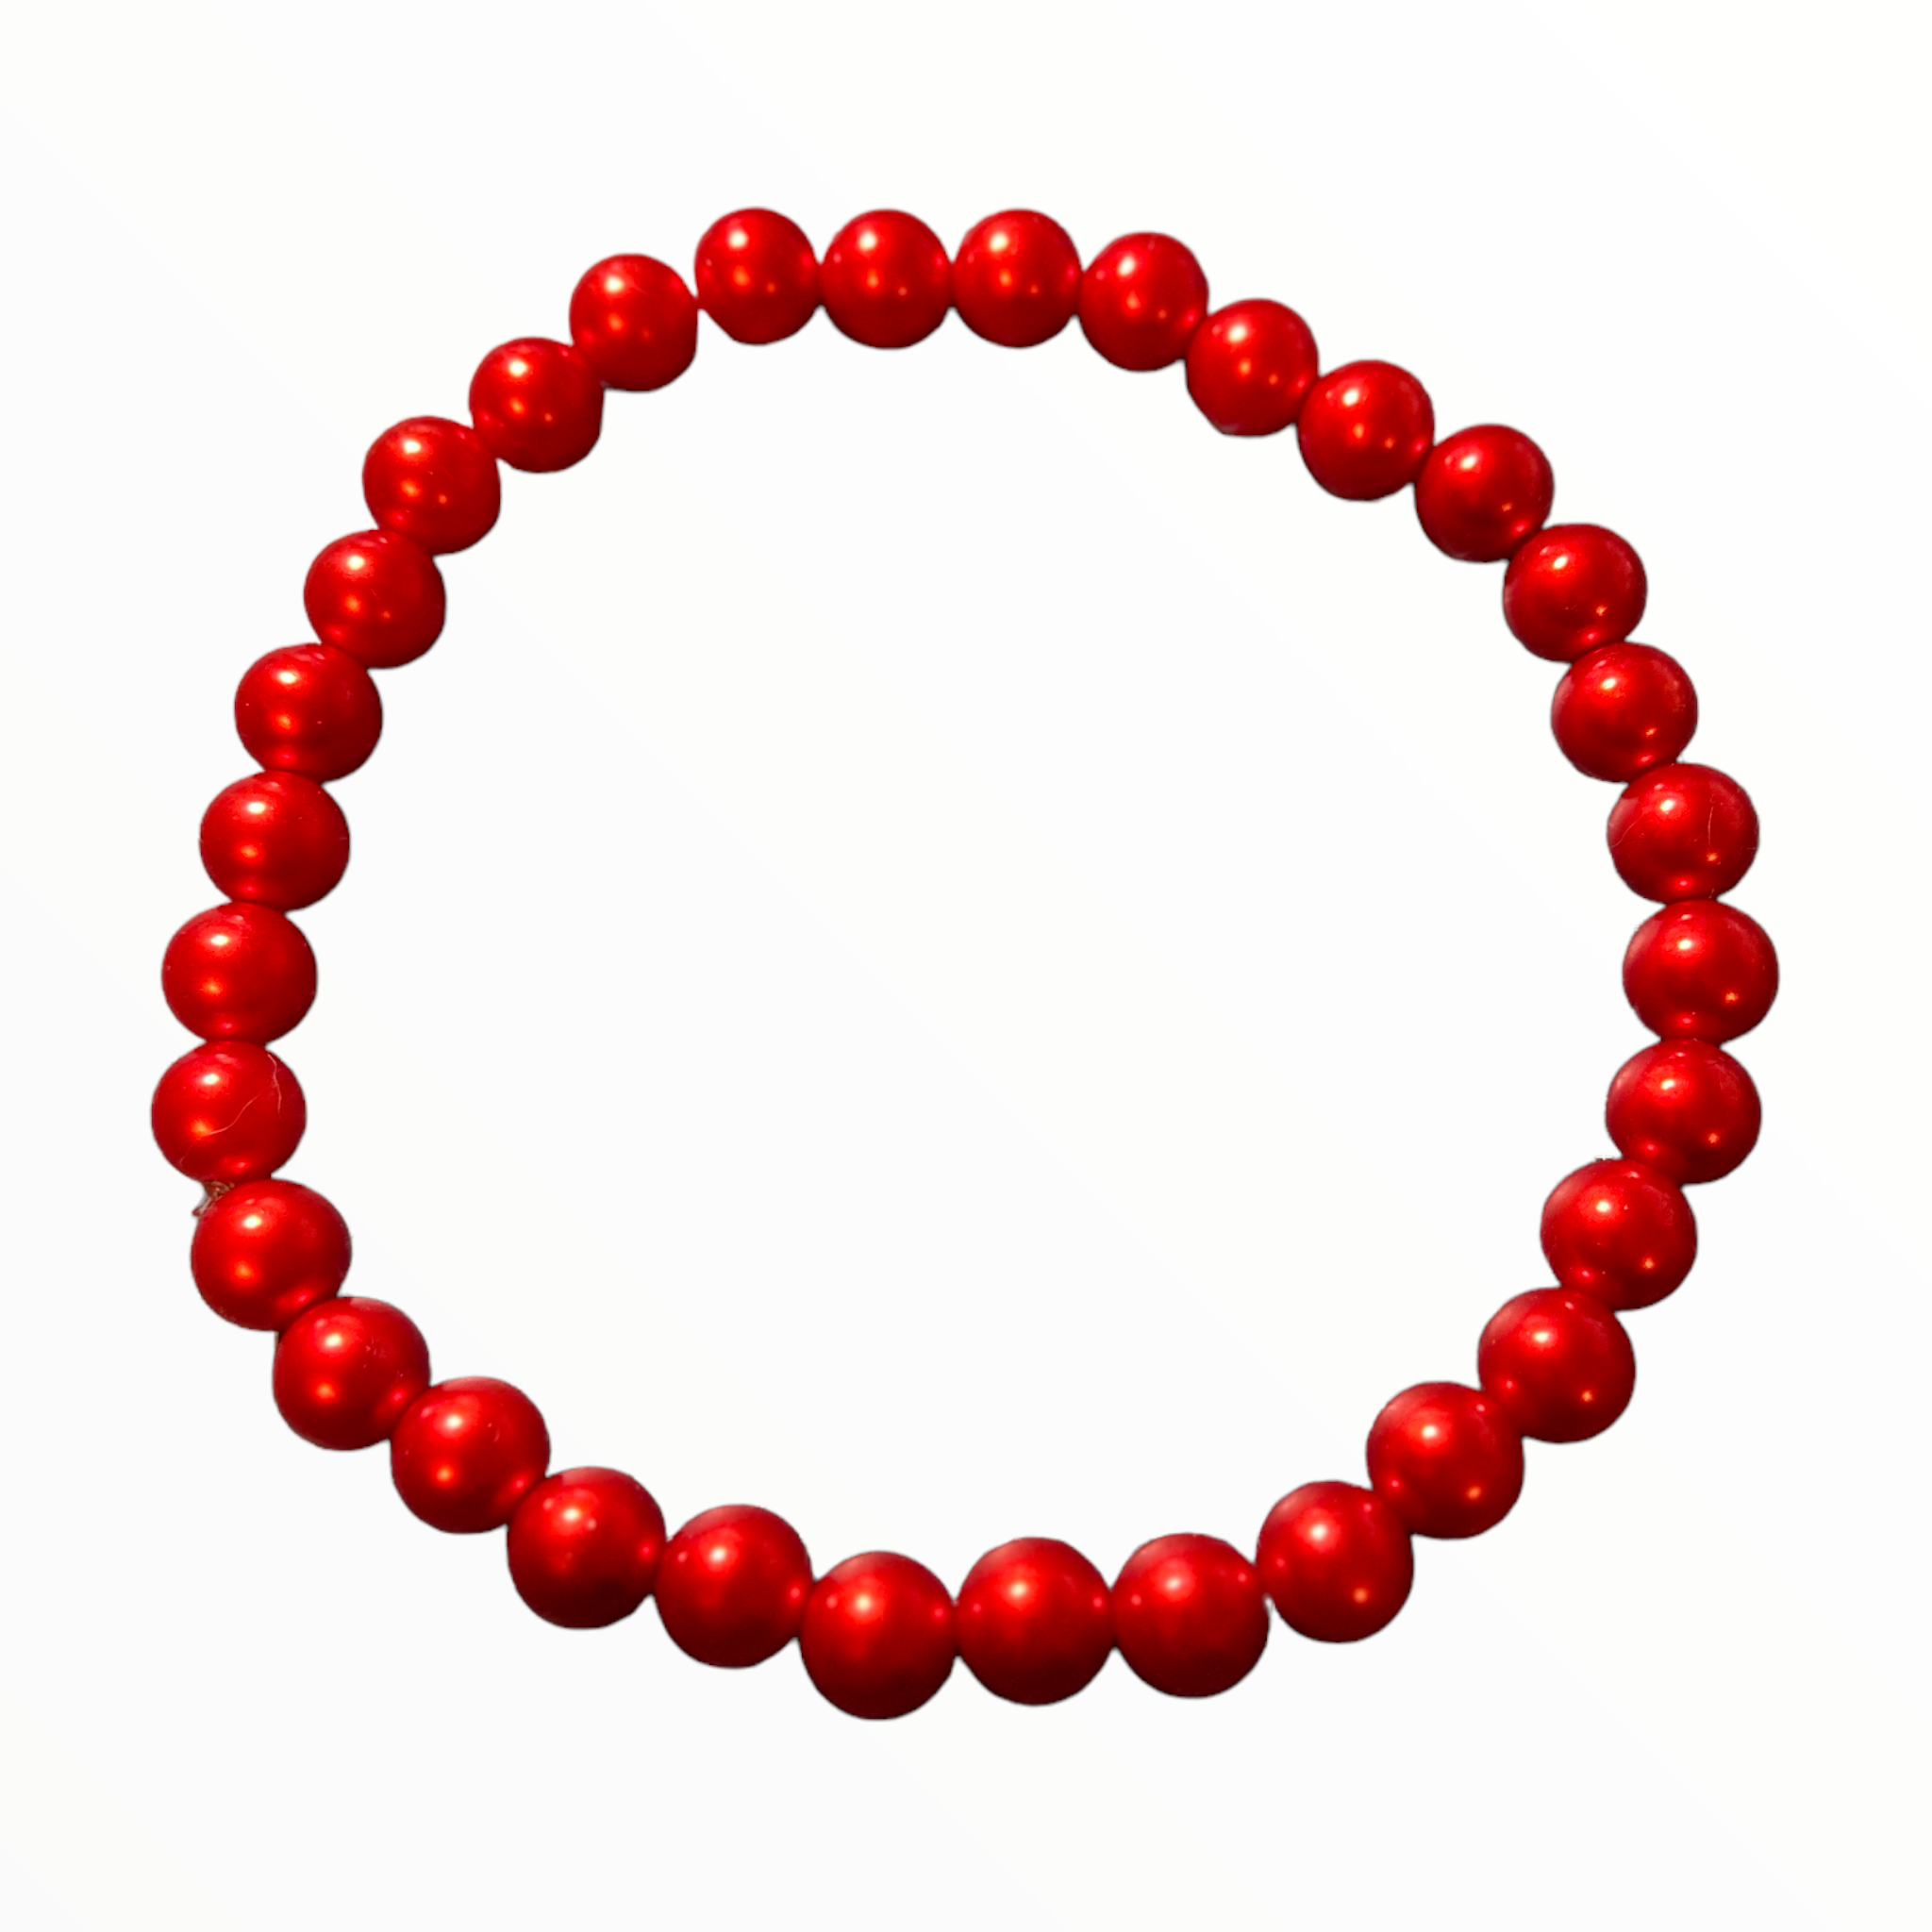 Red Beads & Products - The Bead Shop